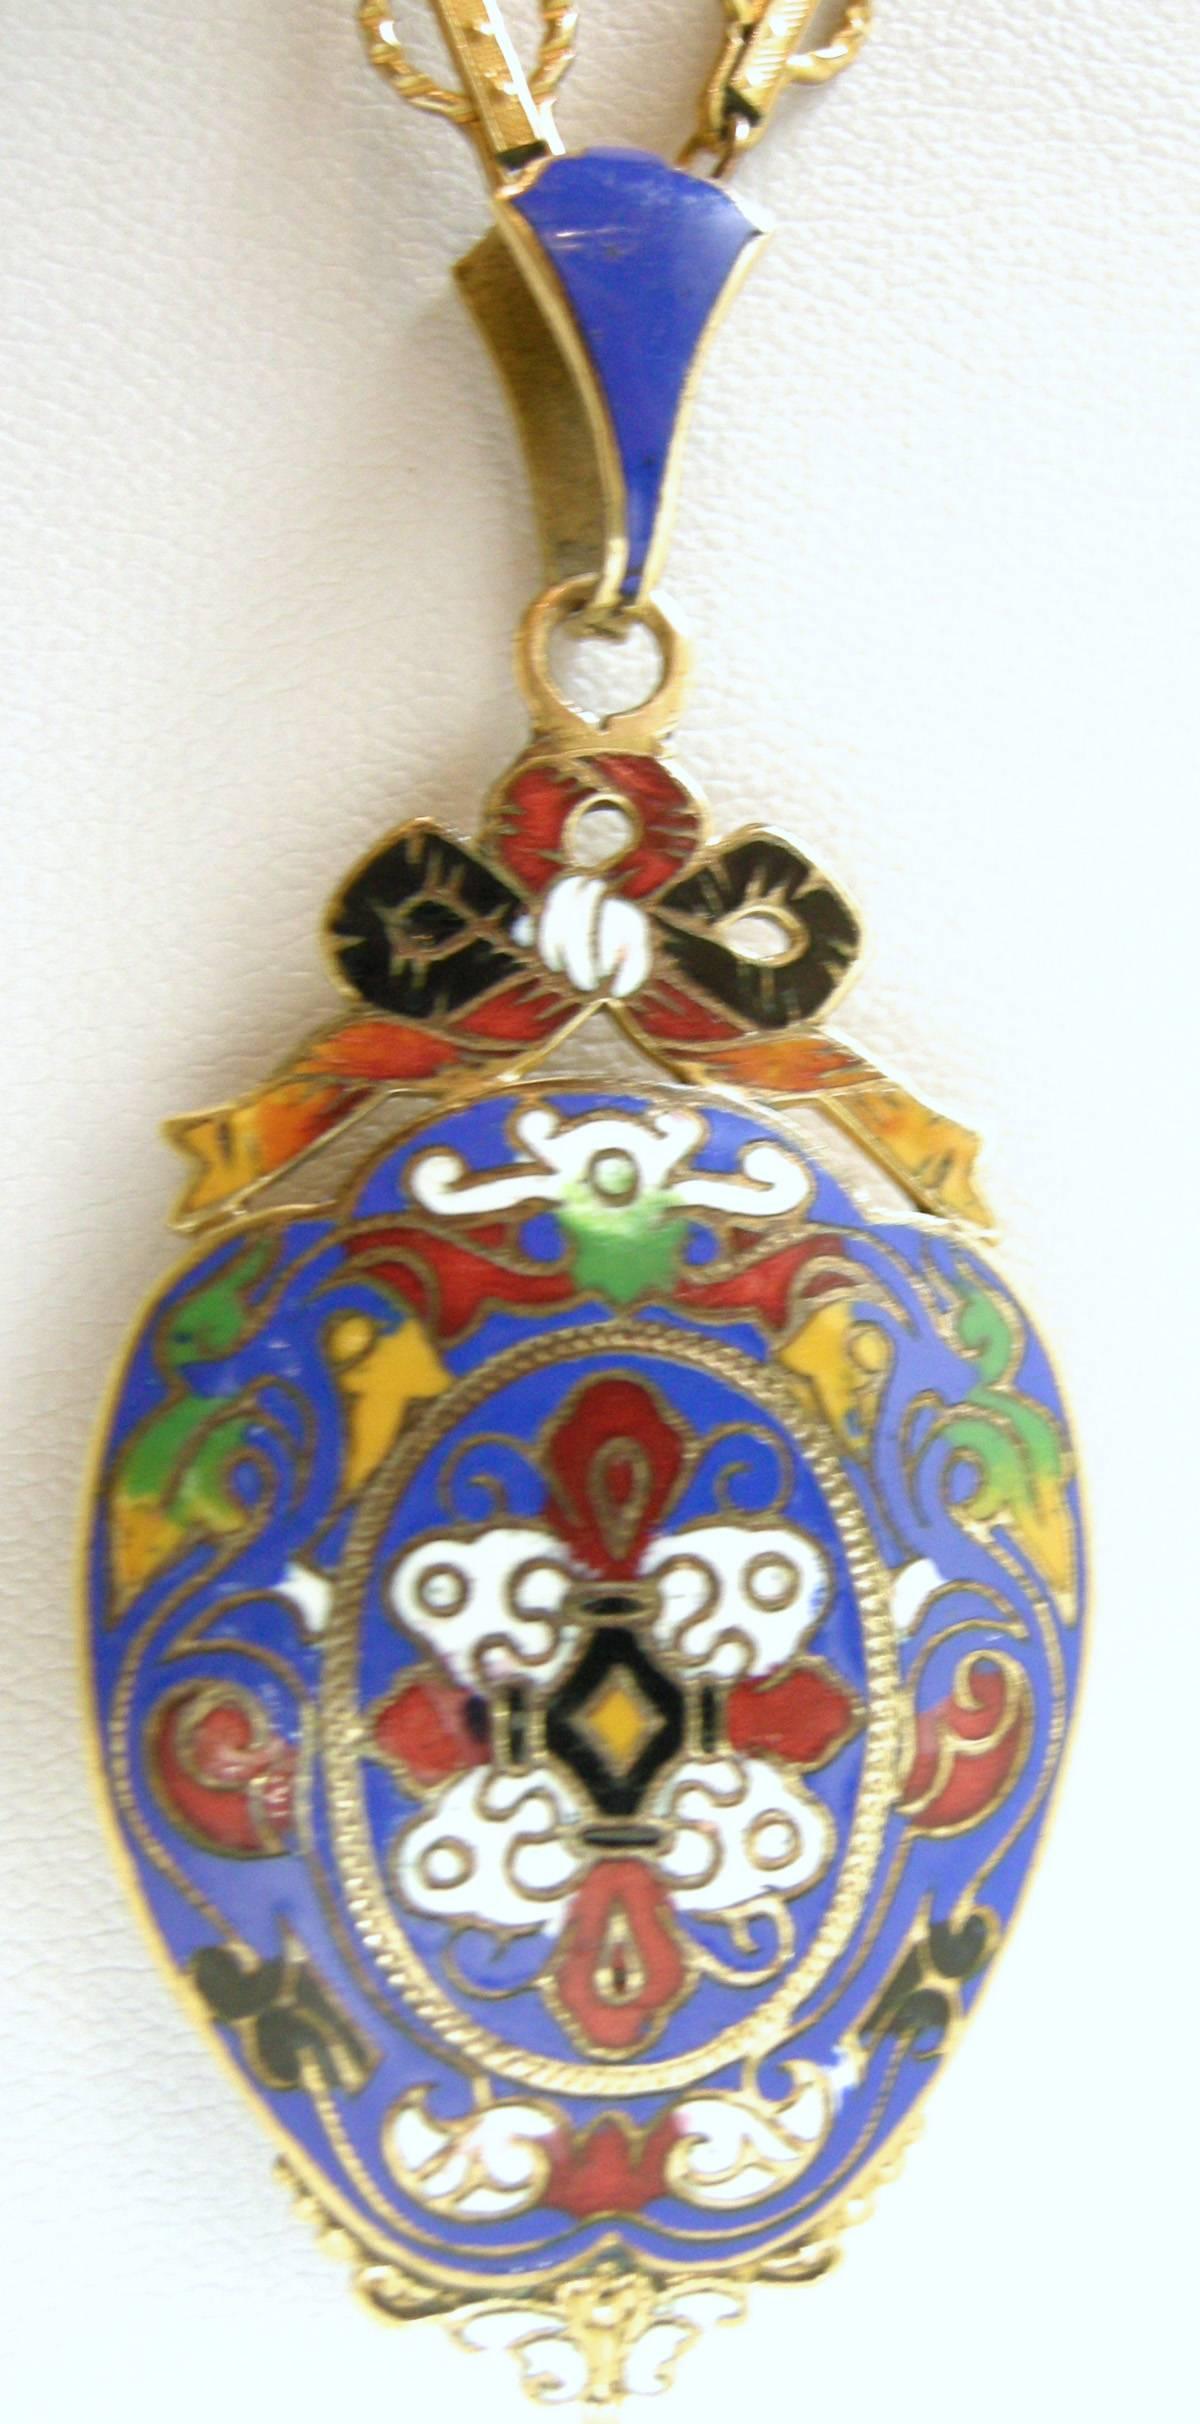 These Victorian Cloisonné lockets are very hard to find especially in such good condition.  The center pendant locket has beautiful hand painted cloisonné enameling and the back opens up to a locket. This one has an old photo. The locket is